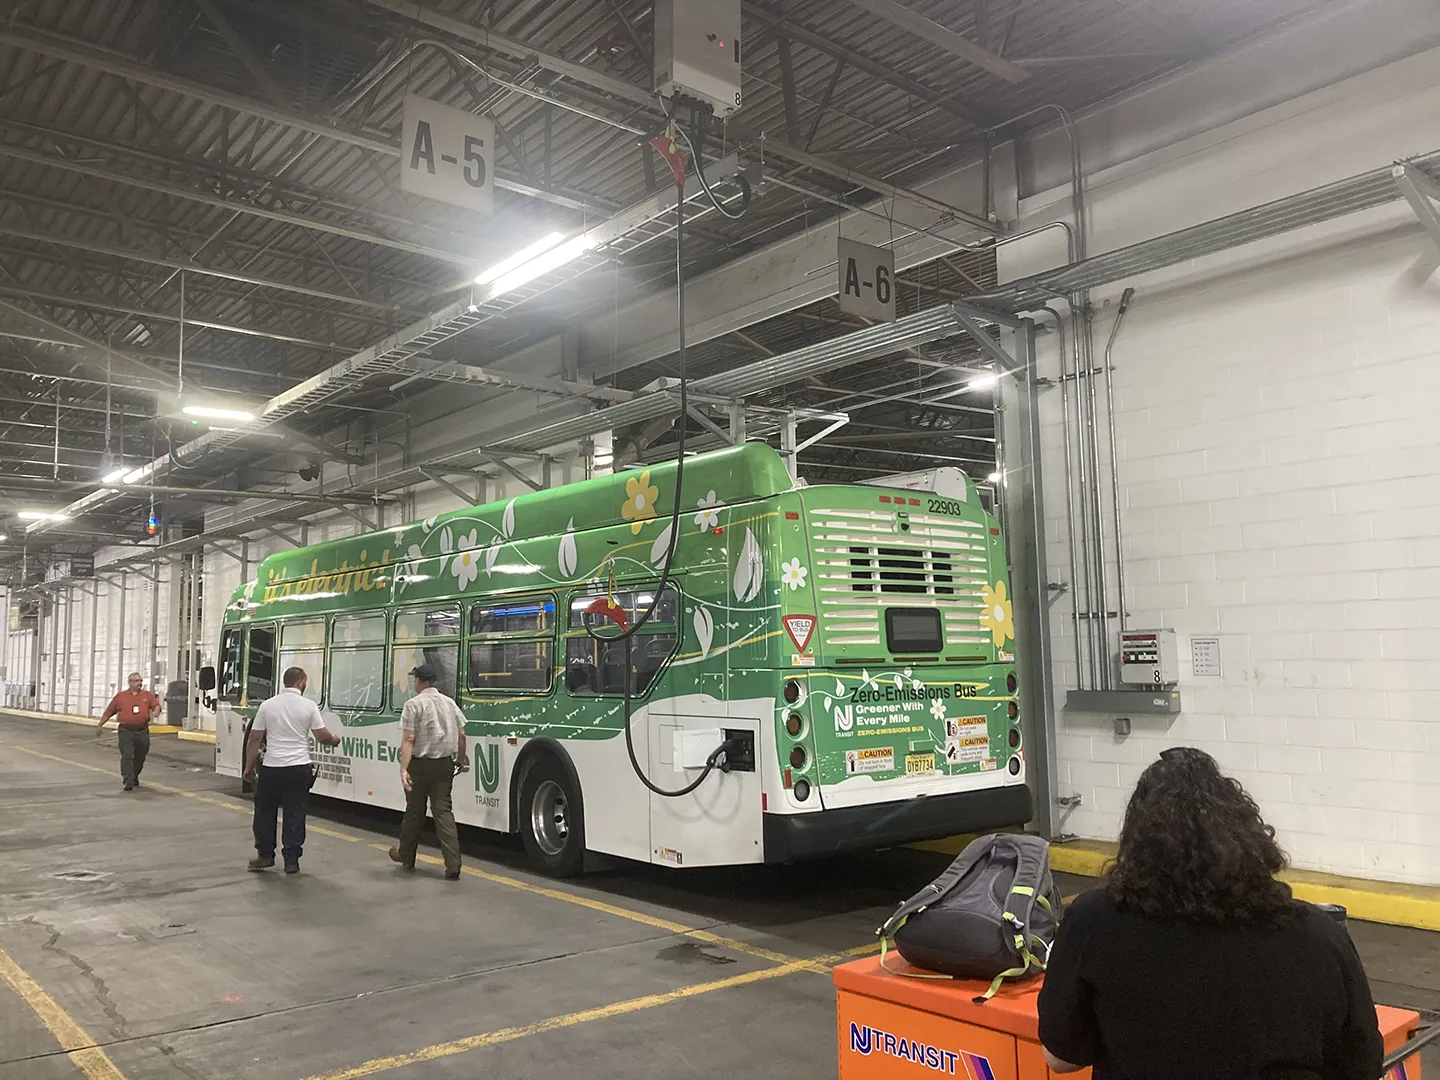 The Newtown Bus Garage is equipped with an overhead electric charging station for a NJ Transit project.